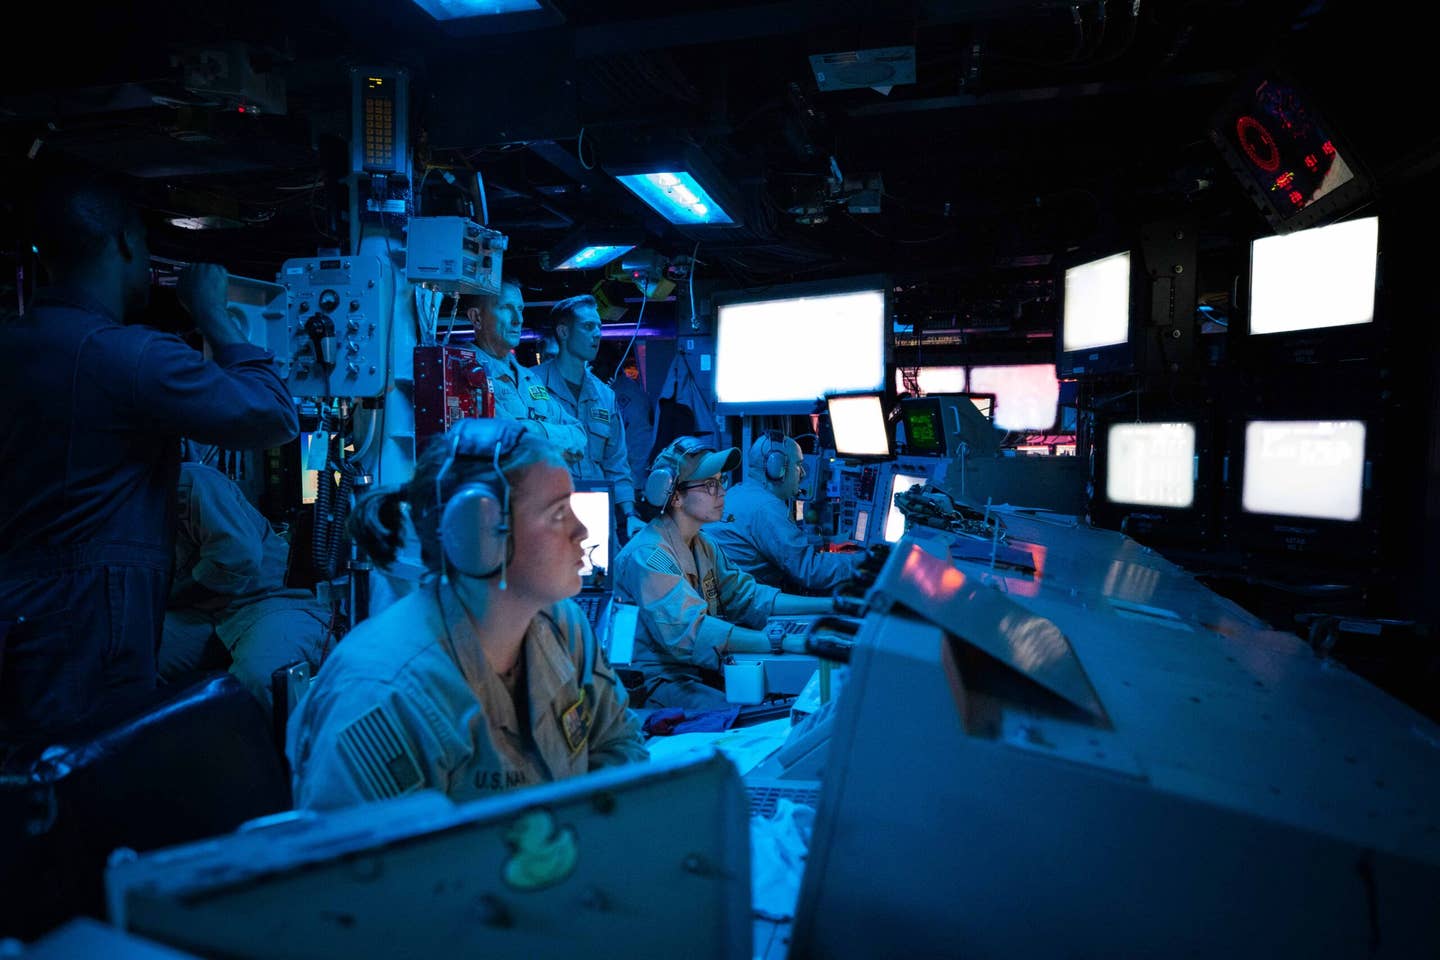 RED SEA (Oct. 19, 2023) Sailors assigned to the Arleigh Burke-class guided-missile destroyer USS Carney (DDG 64) stand watch in the ship’s Combat Information Center during an operation to defeat a combination of Houthi missiles and unmanned aerial vehicles, Oct. 19. Carney is deployed to the U.S. 5th Fleet area of operations to help ensure maritime security and stability in the Middle East region. (U.S. Navy photo by Mass Communication Specialist 2nd Class Aaron Lau)